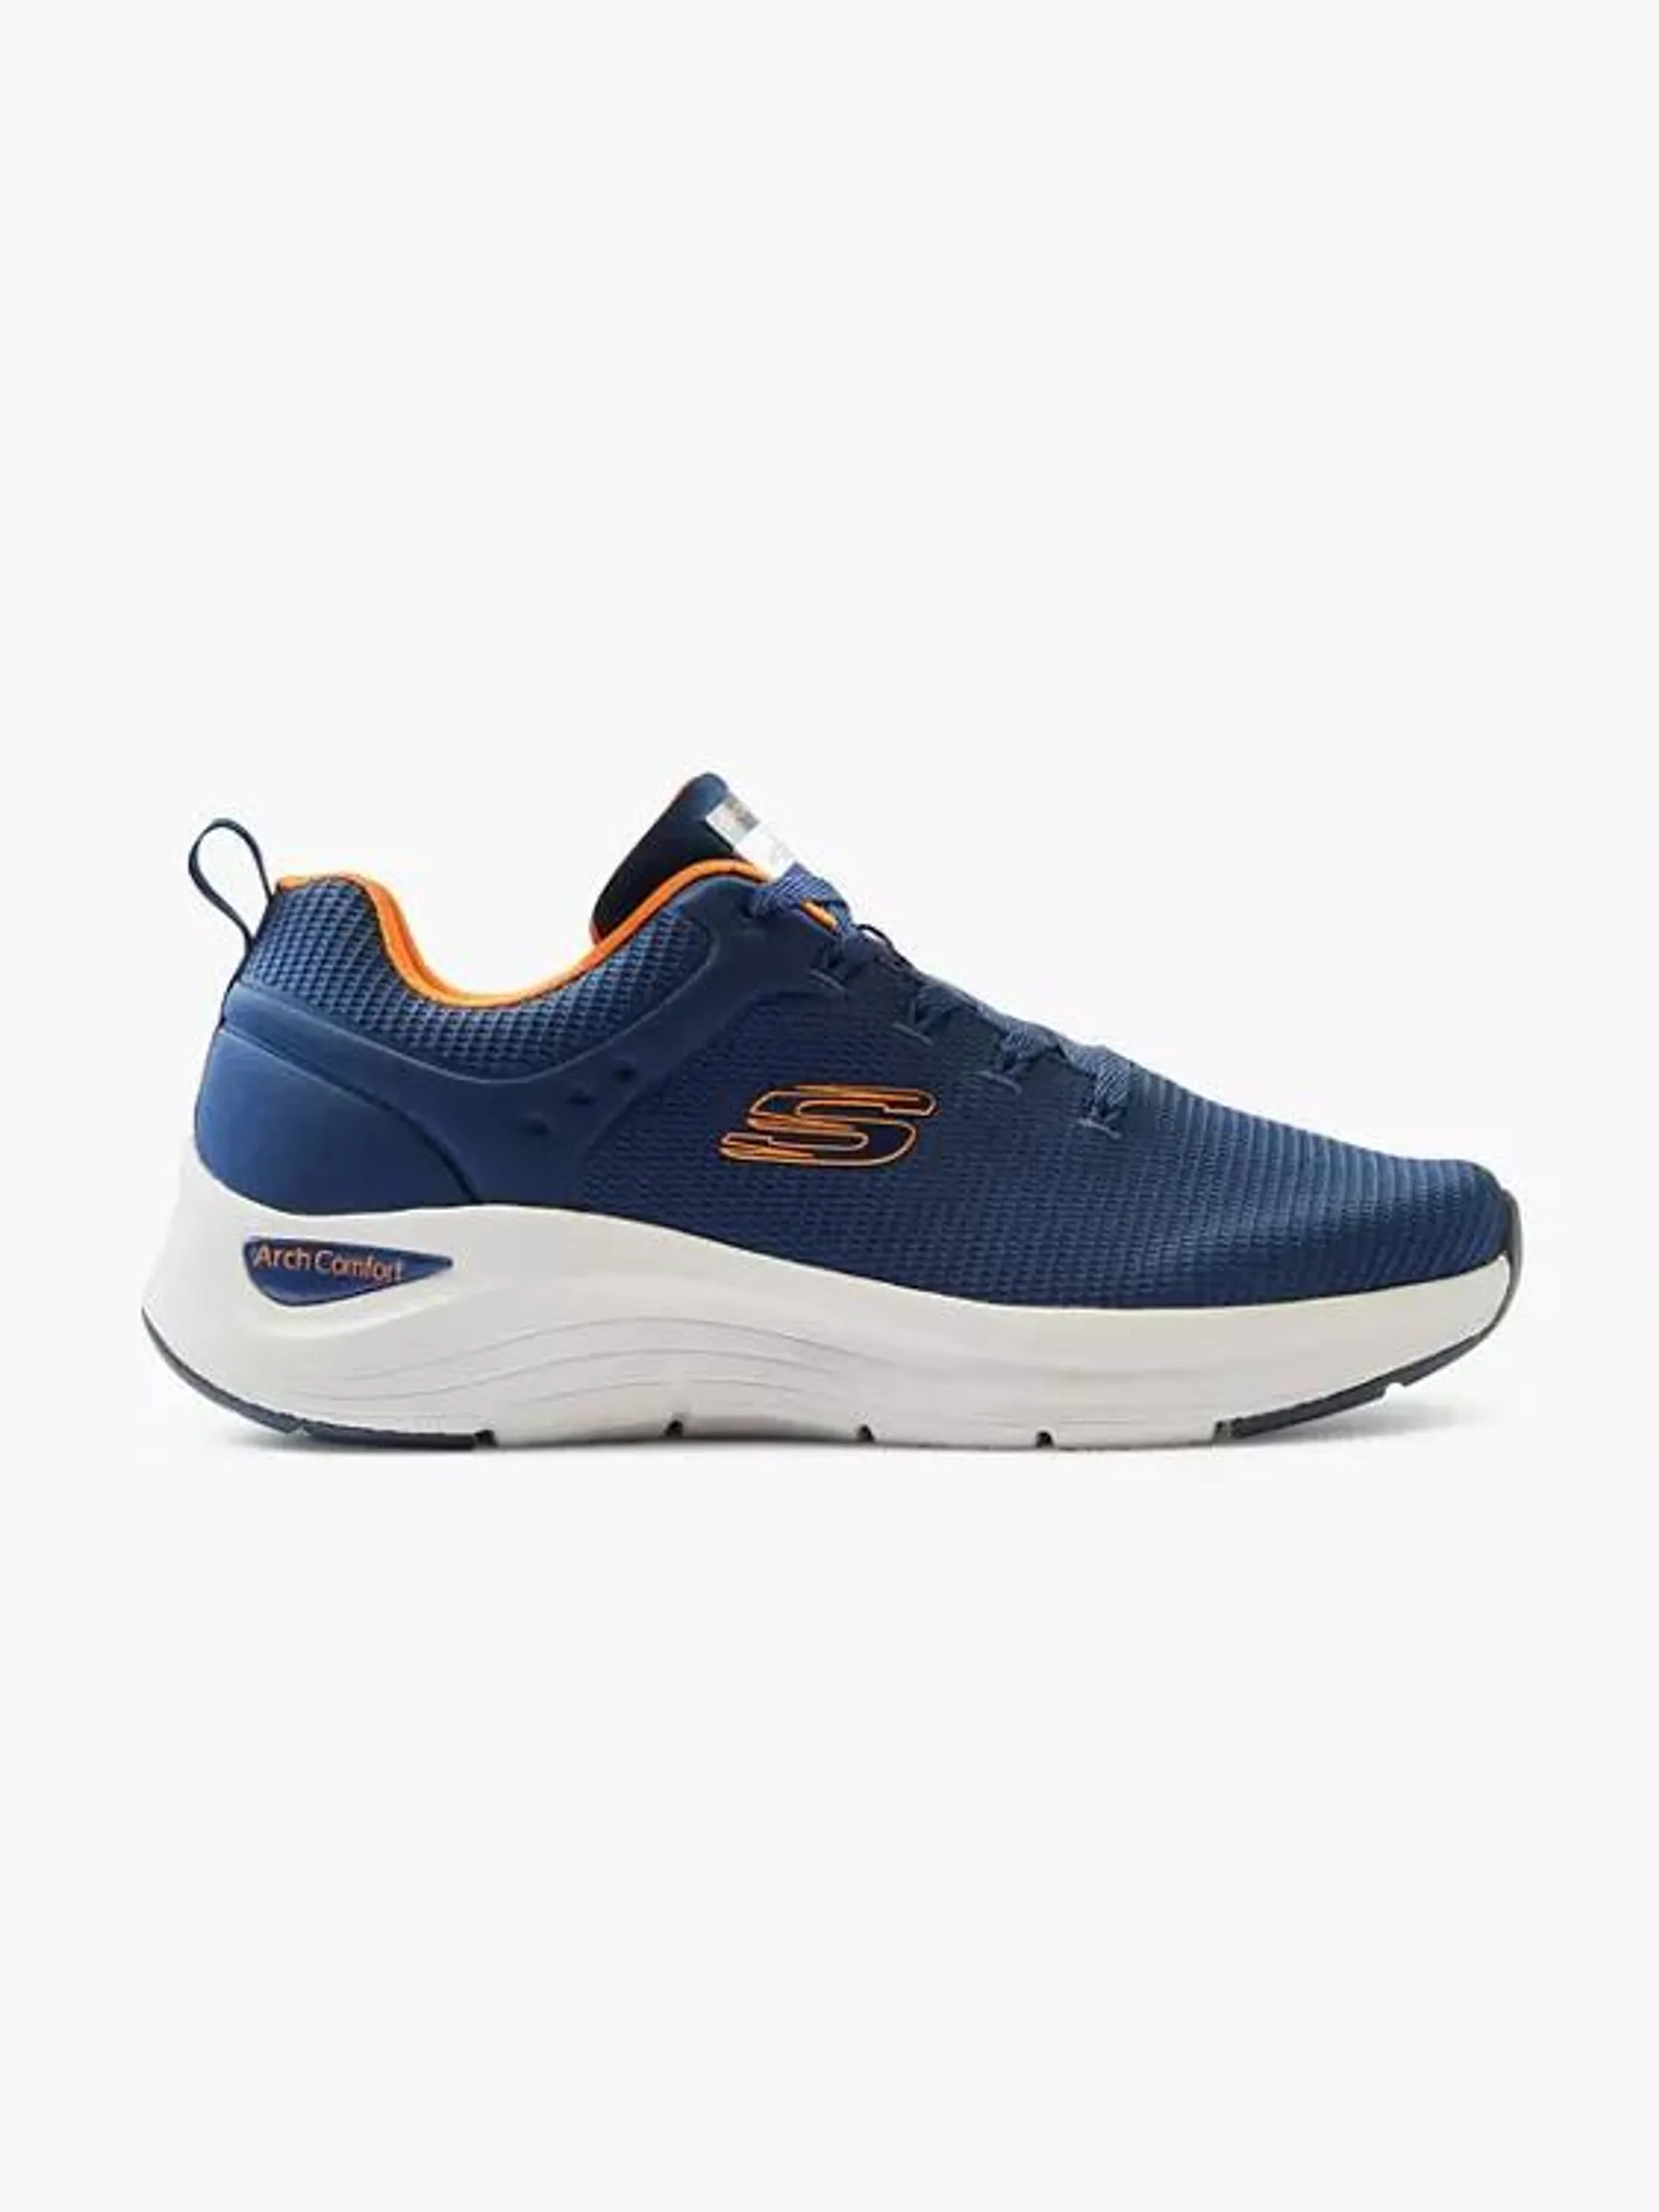 Skechers Navy Arch Comfort Lace-up Trainer